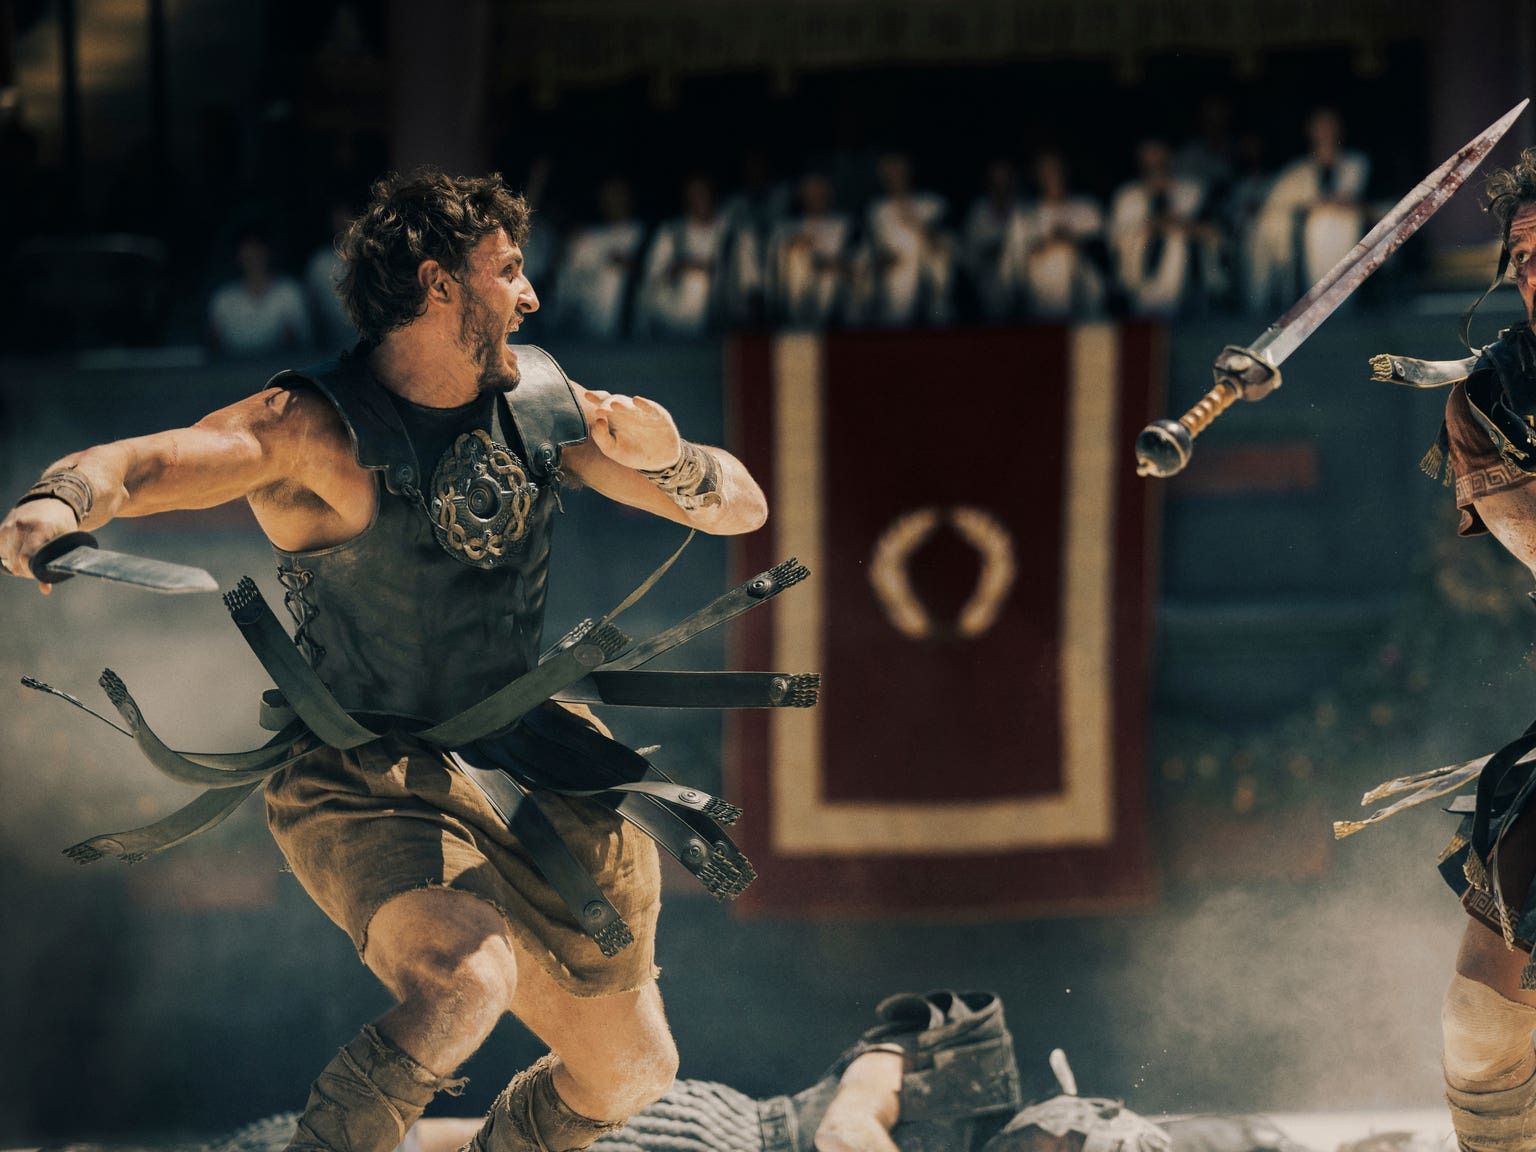 Paul Mescal faces off with Pedro Pascal in Gladiator II trailer